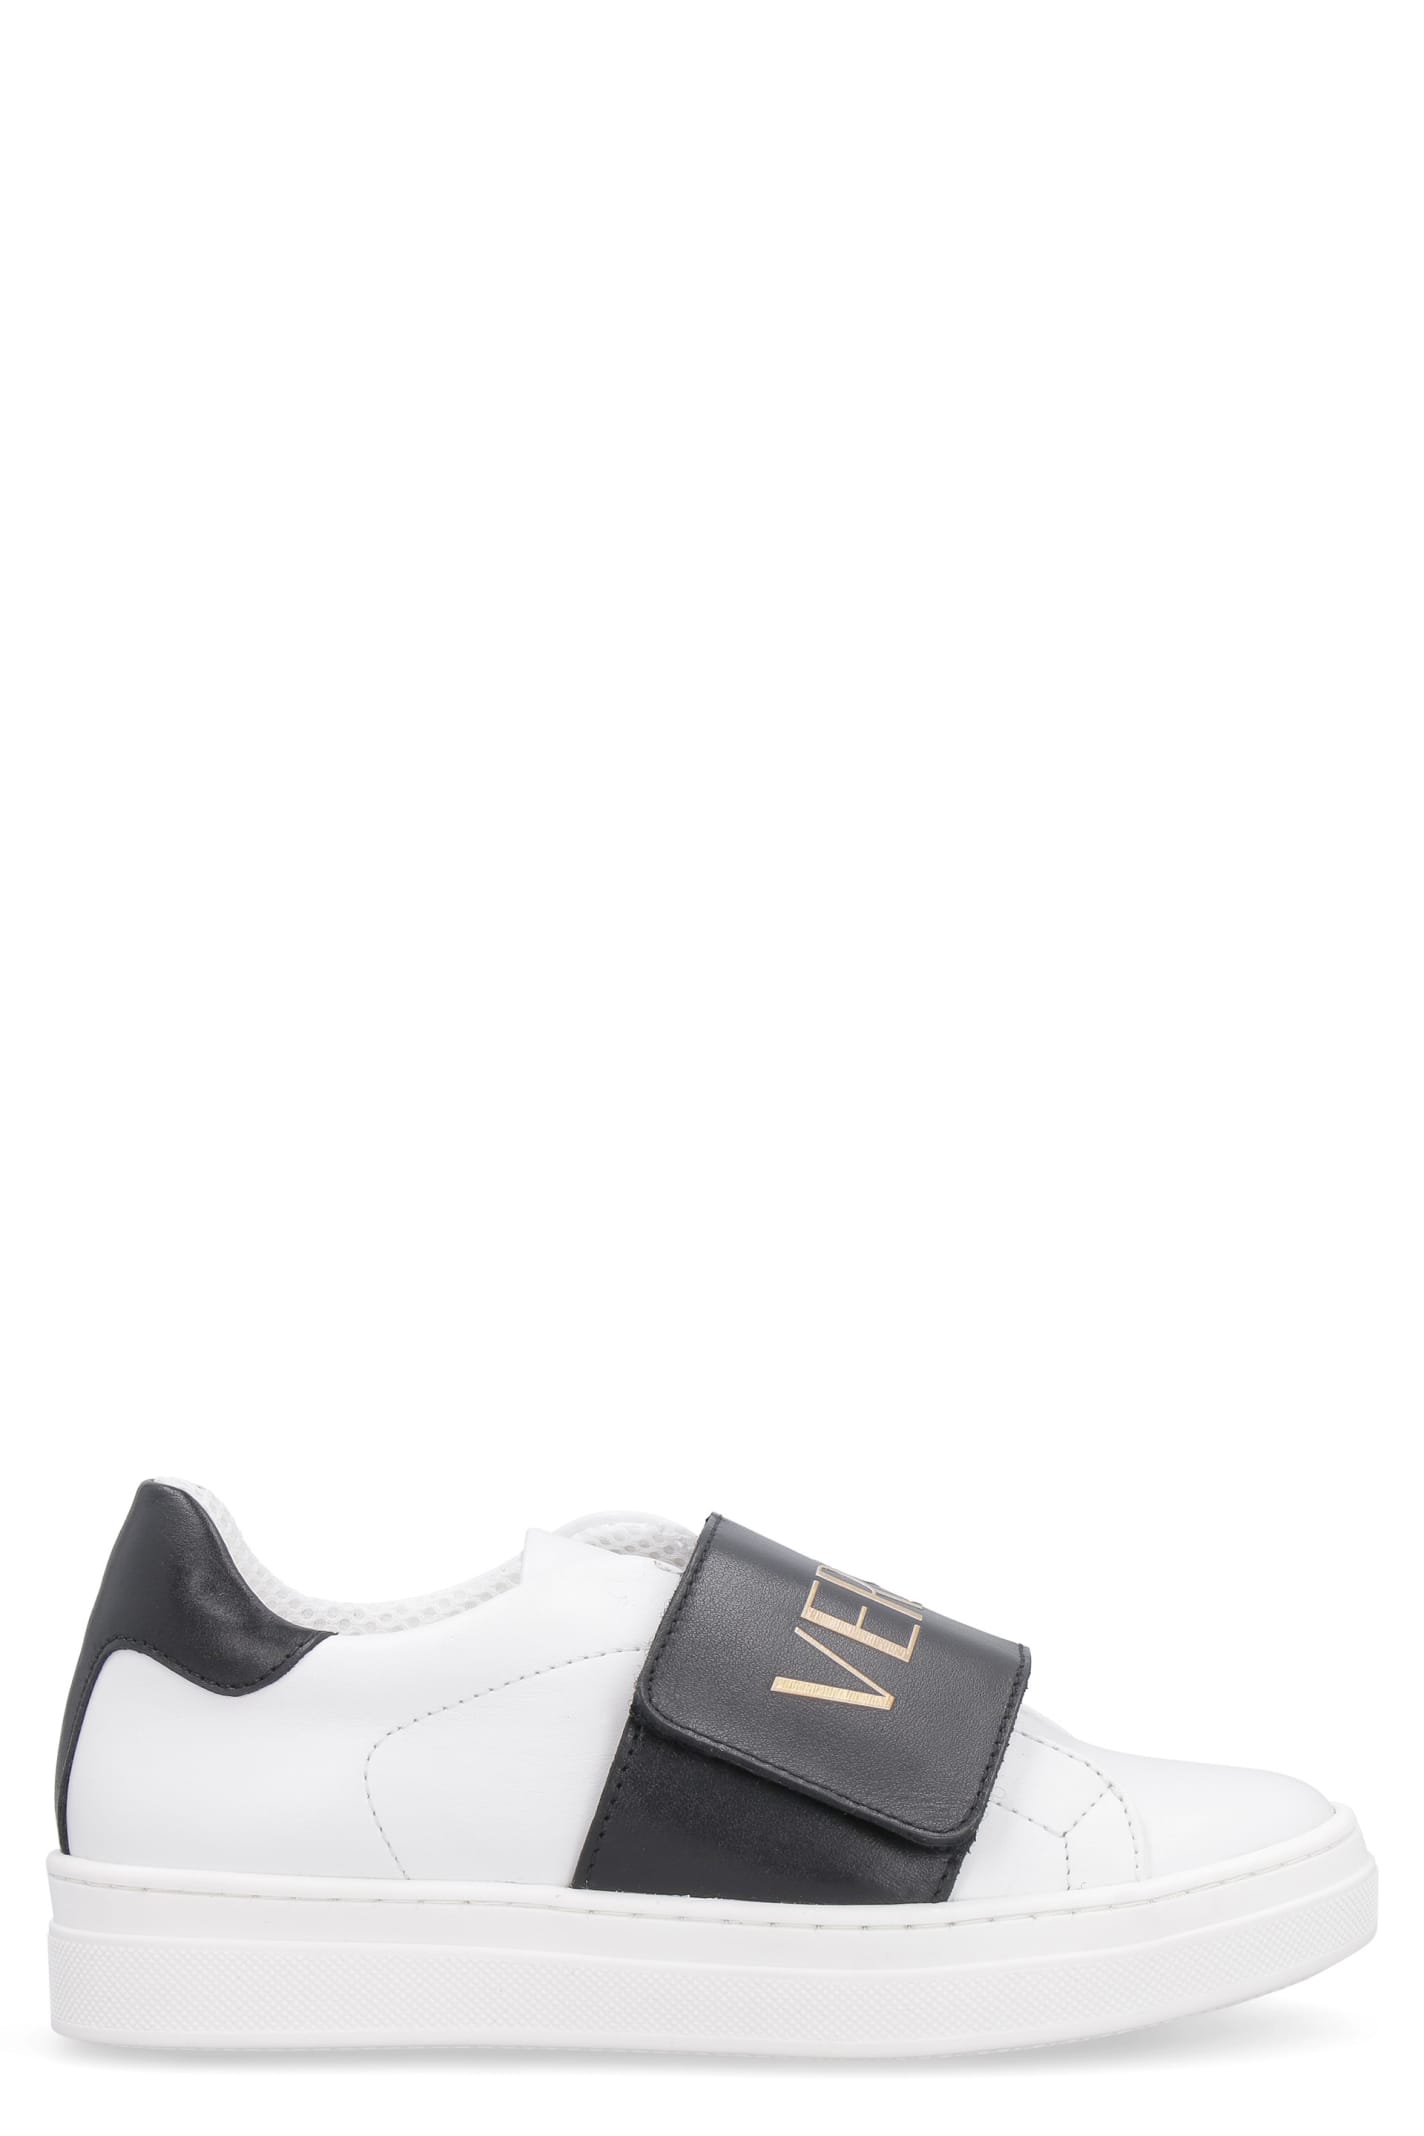 Young Versace Logo Detail Leather Sneakers